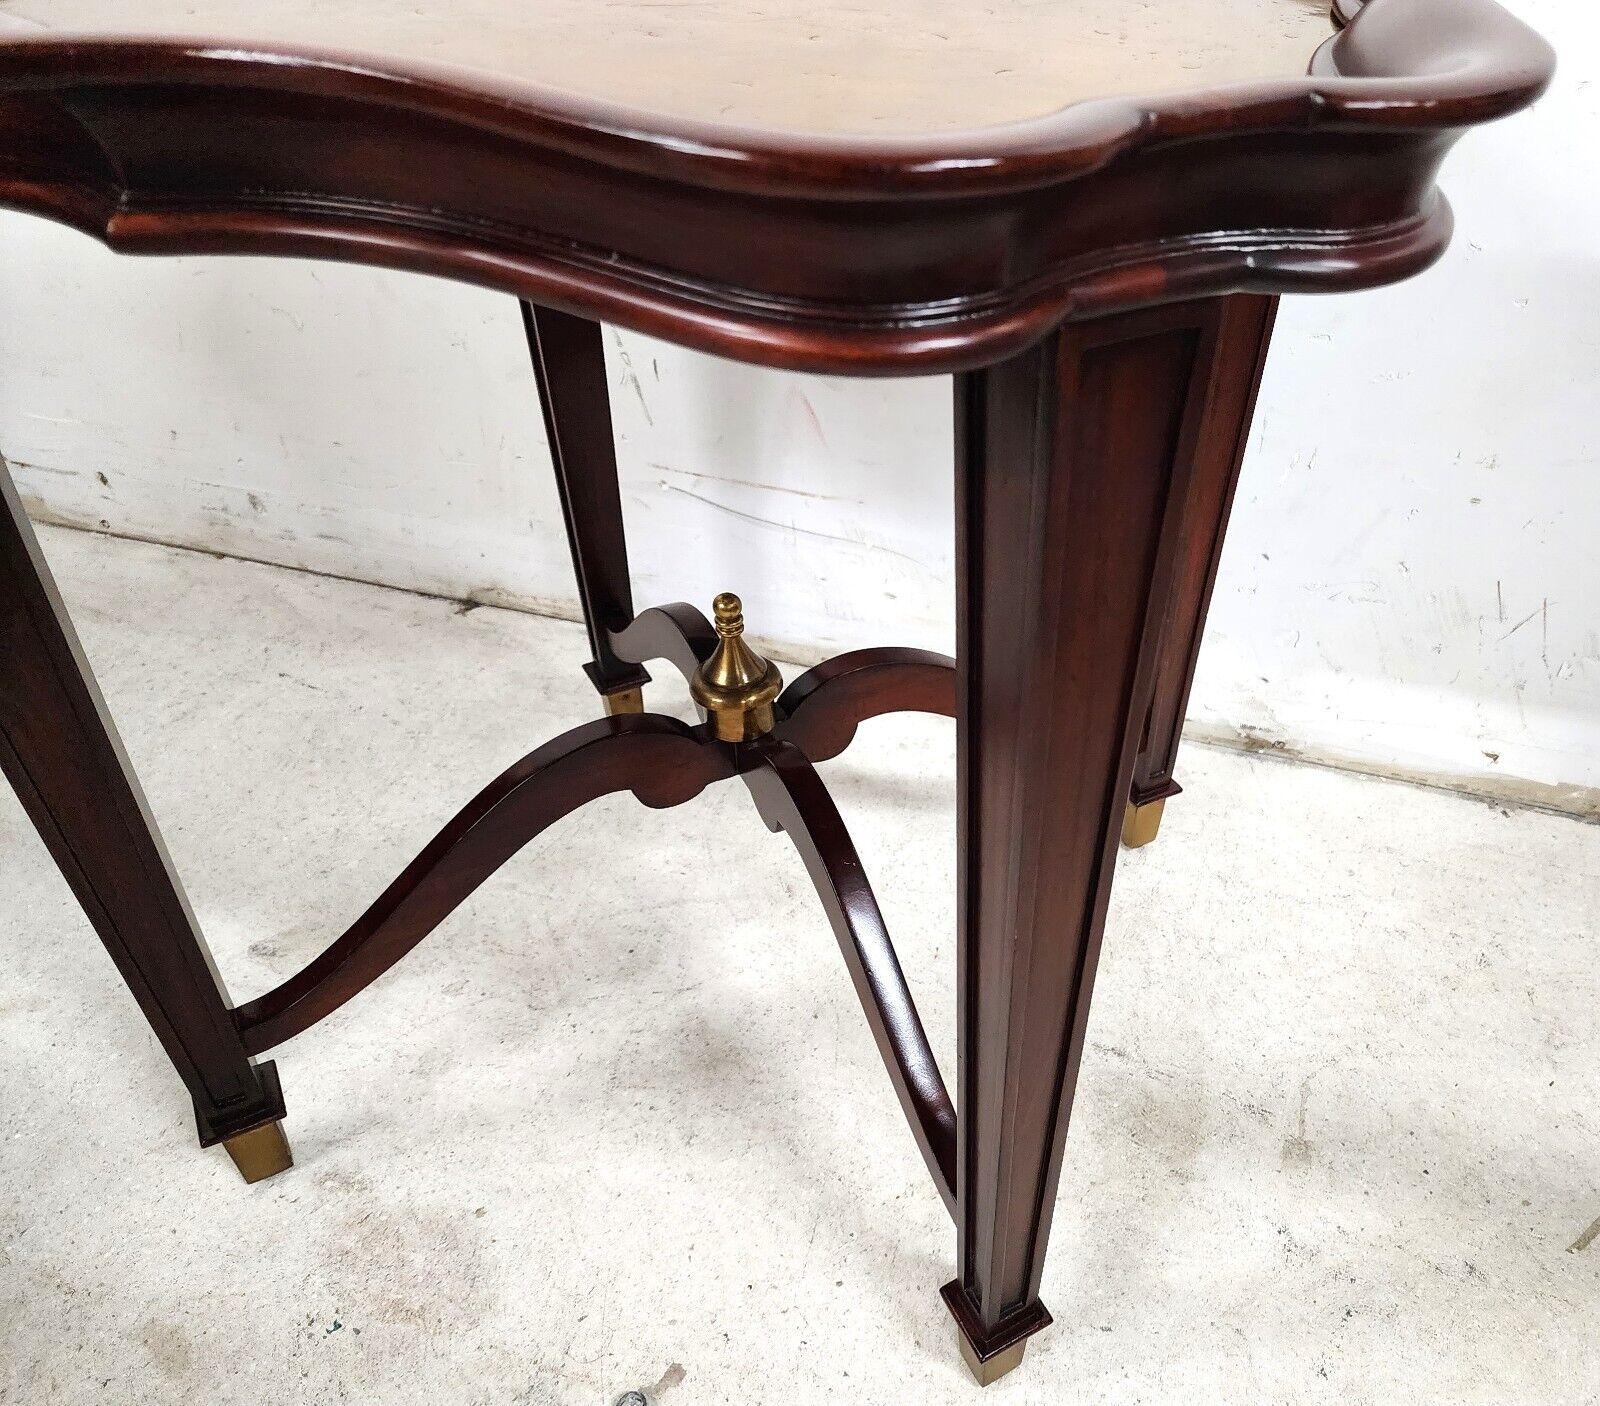 For FULL item description click on CONTINUE READING at the bottom of this page.

Offering One Of Our Recent Palm Beach Estate Fine Furniture Acquisitions Of A
Mahogany Center Side Table Brass Pie Crust Top by JD Young & Sons
Beautiful solid Mahogany